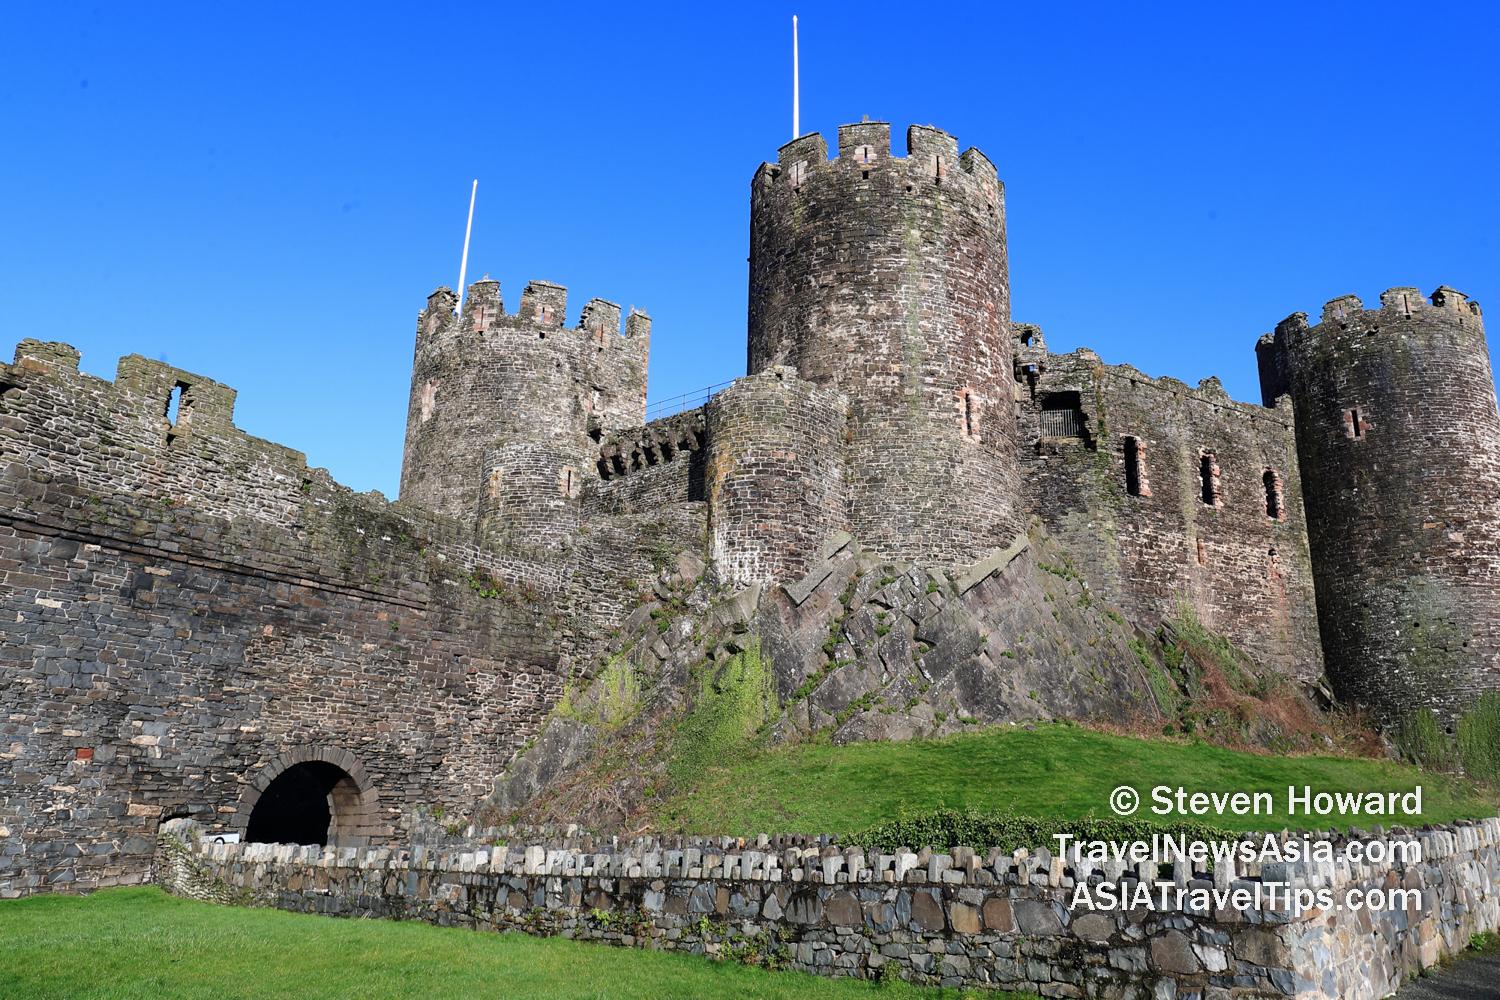 It is now much easier for eligible travellers to enter the UK and visit beautiful places like Conwy Castle in North Wales. Picture by Steven Howard of TravelNewsAsia.com Click to enlarge.